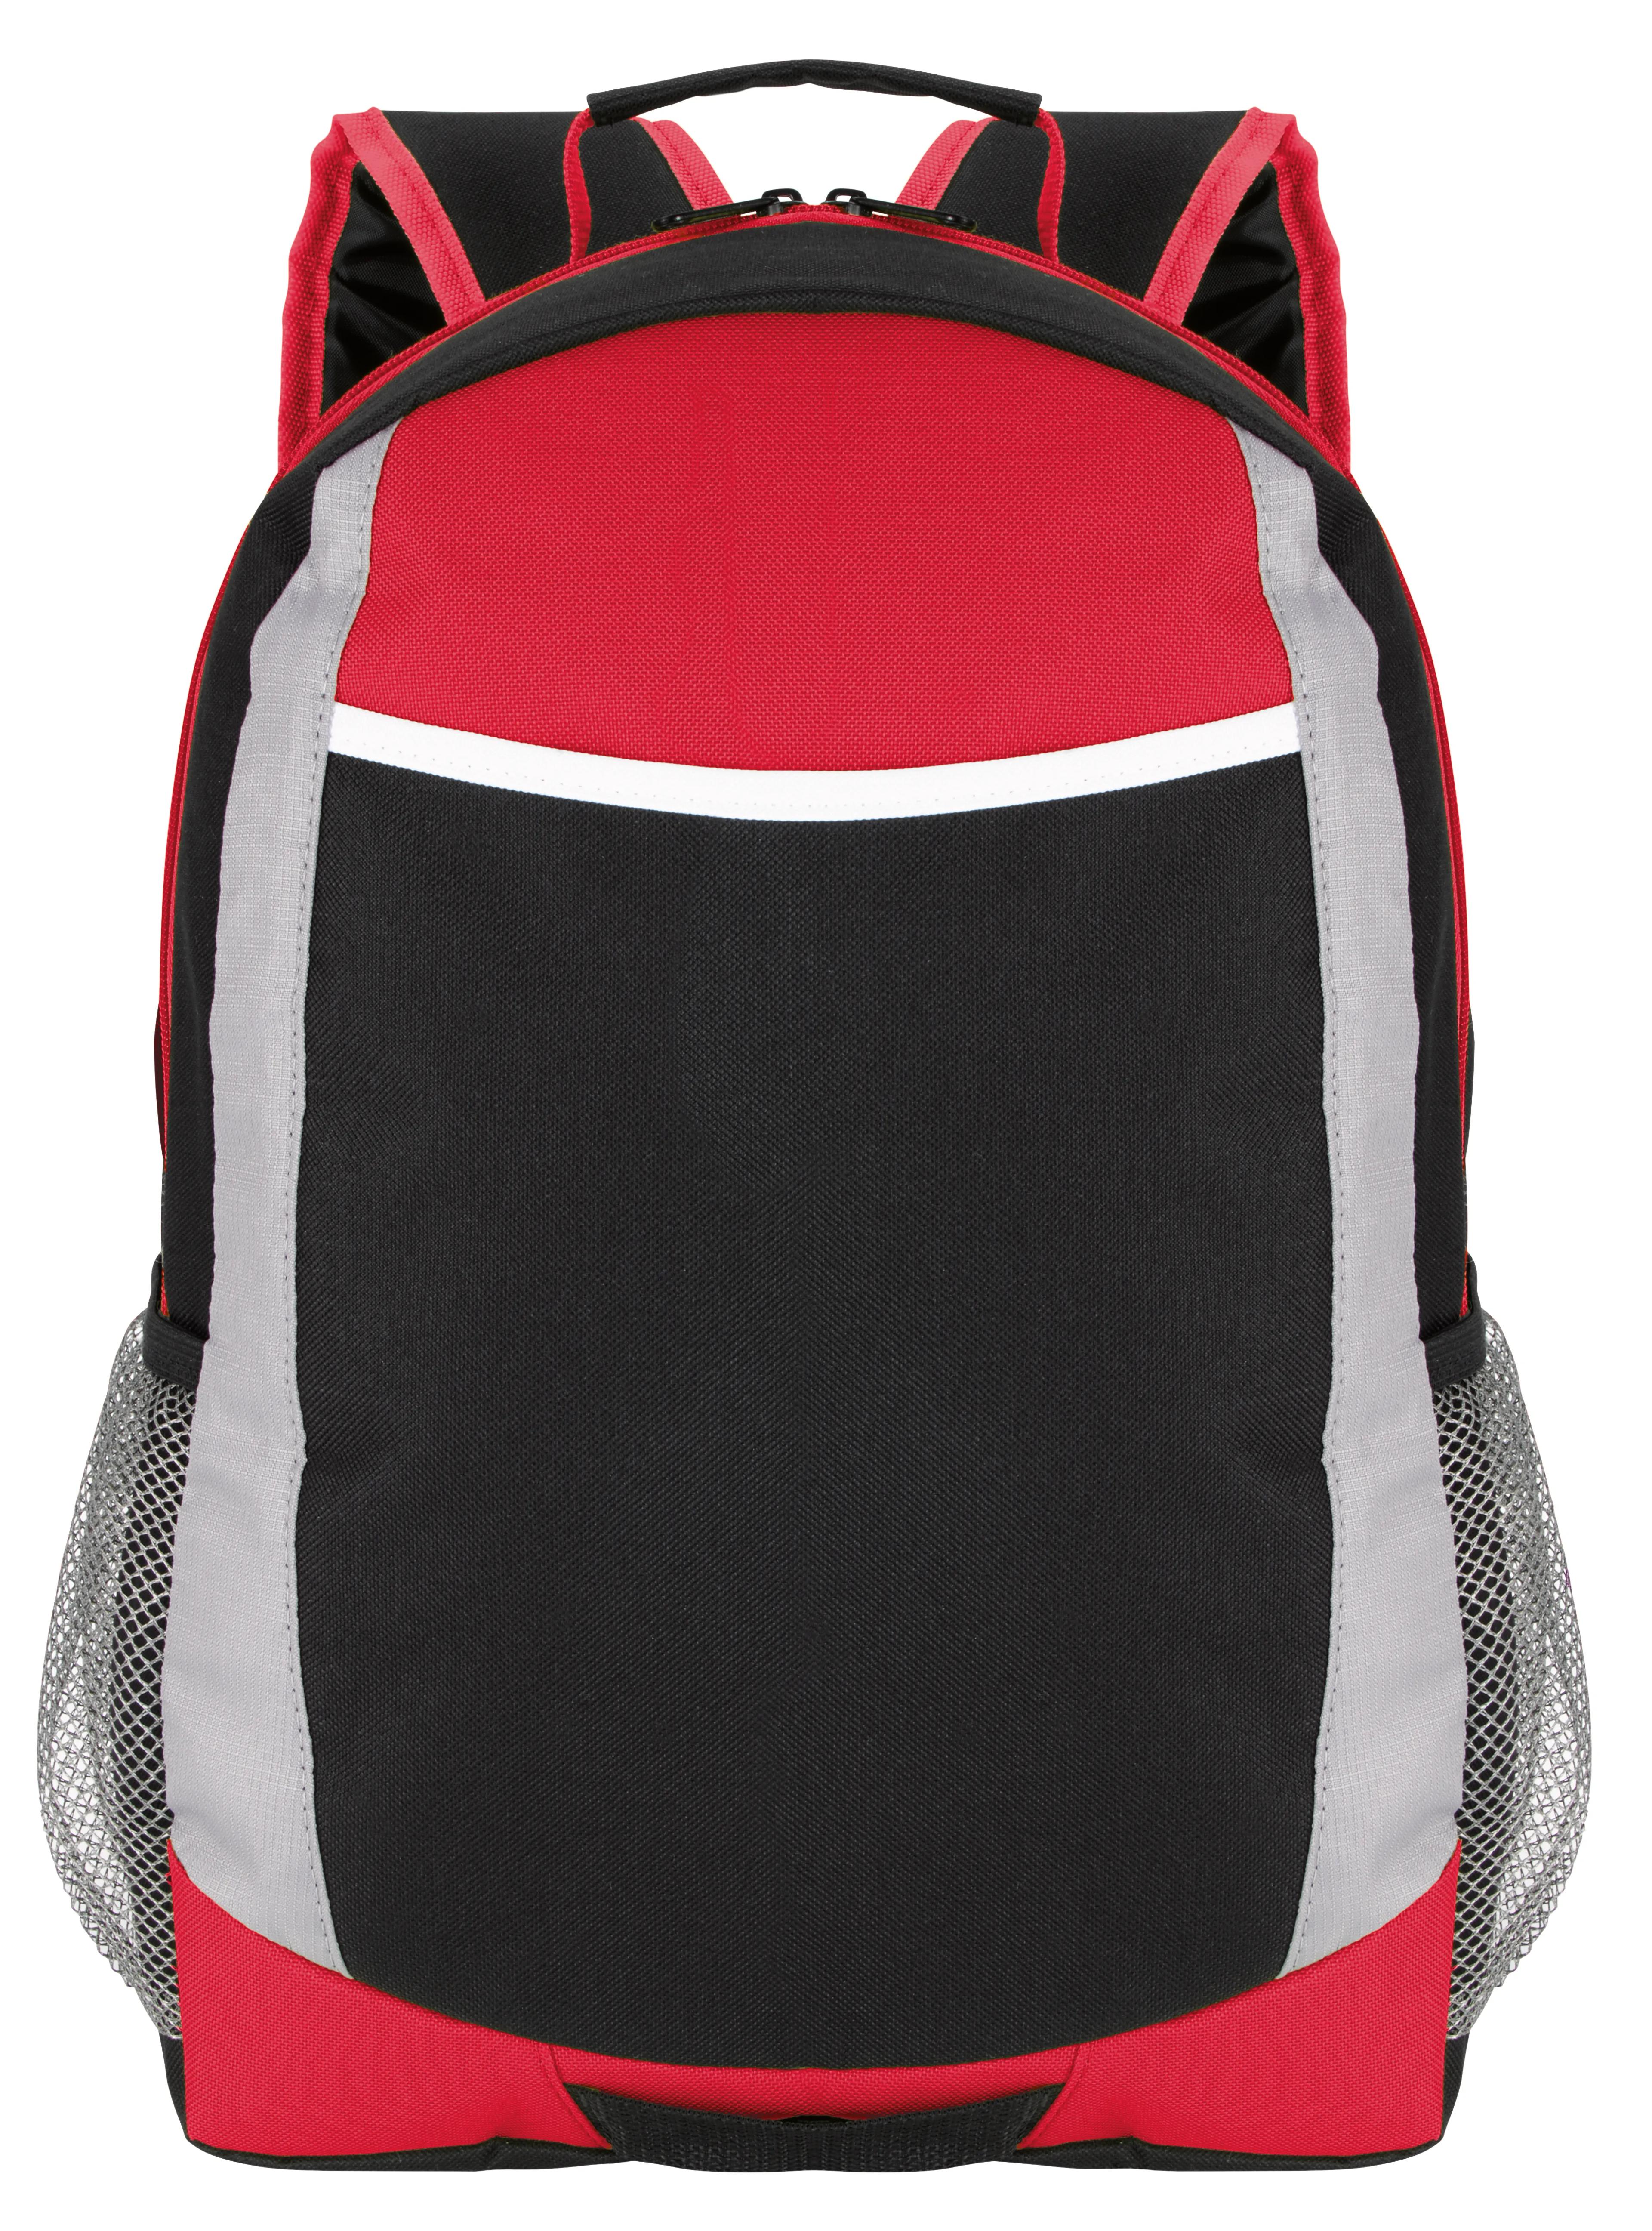 Primary Sport Backpack 2 of 14